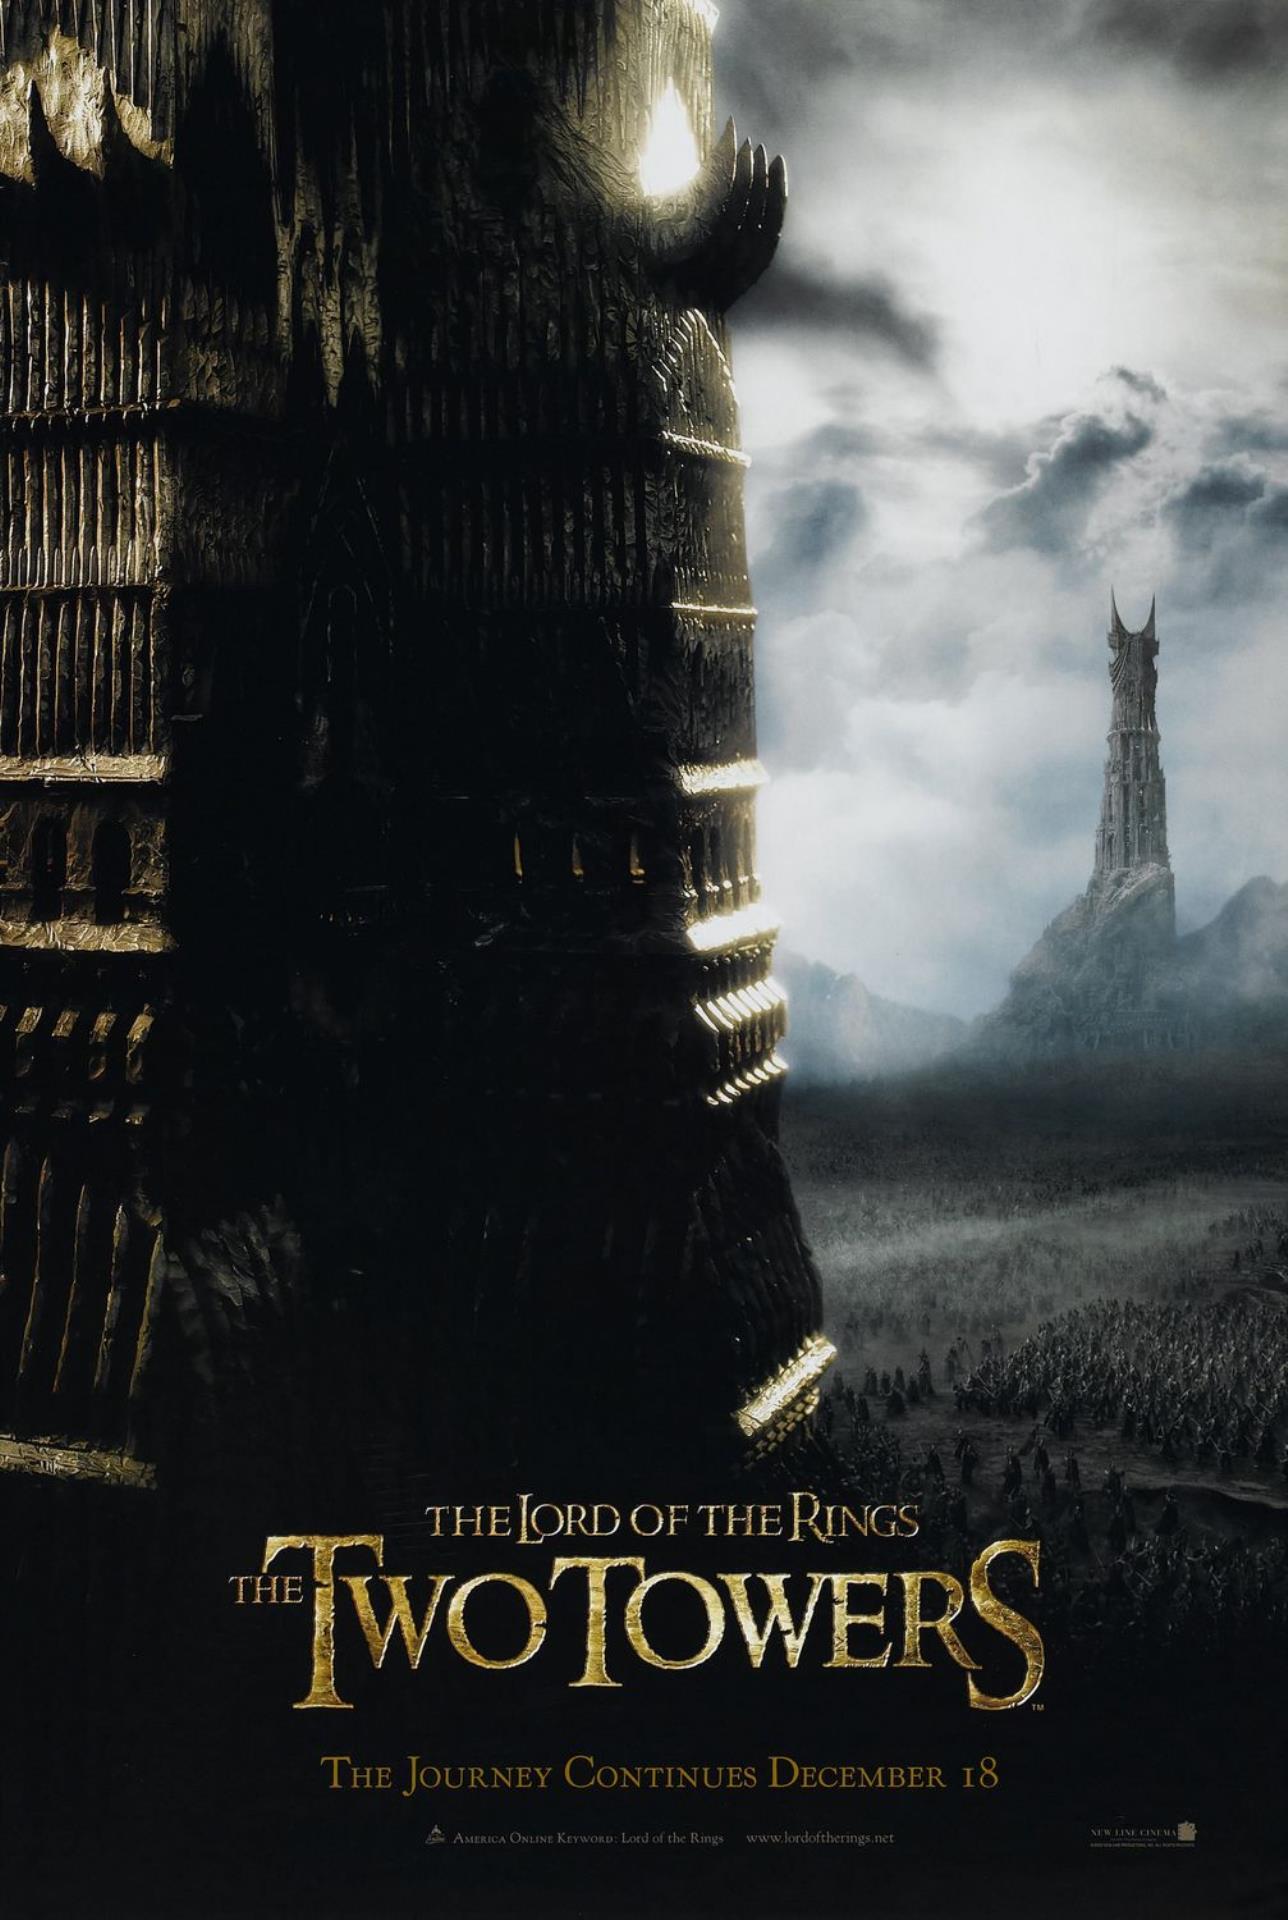 LORD OF THE RINGS: THE TWO TOWERS, THE